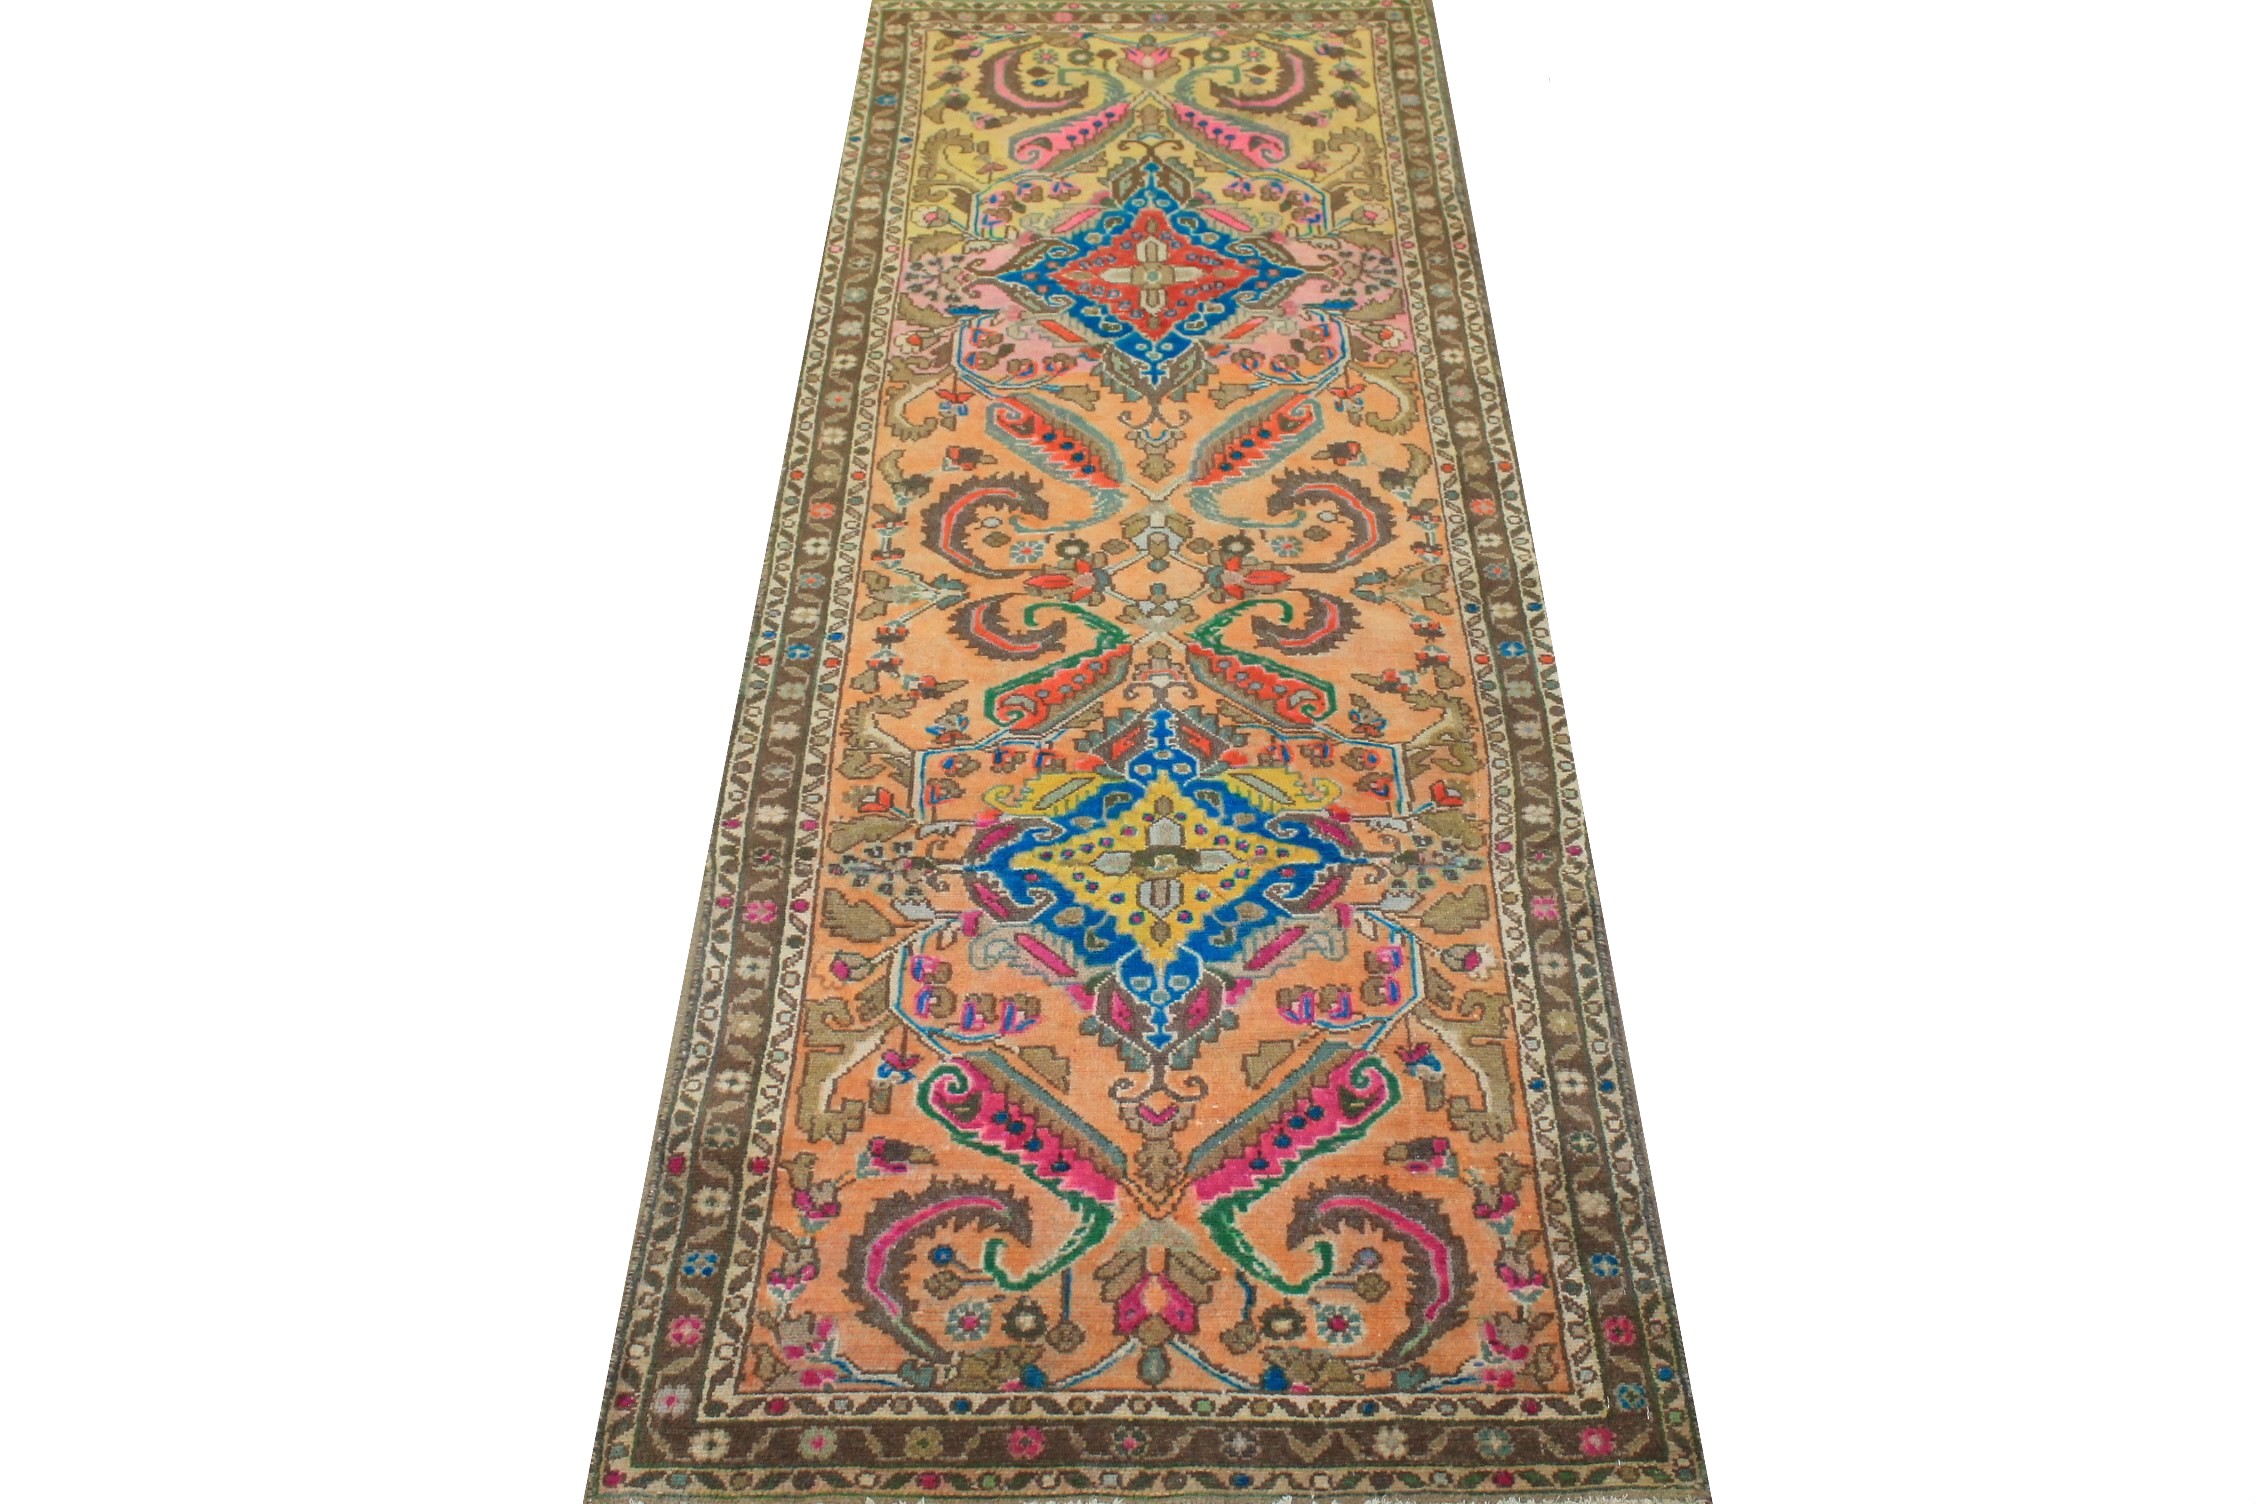 6 ft. Runner Vintage Hand Knotted Wool Area Rug - MR024446